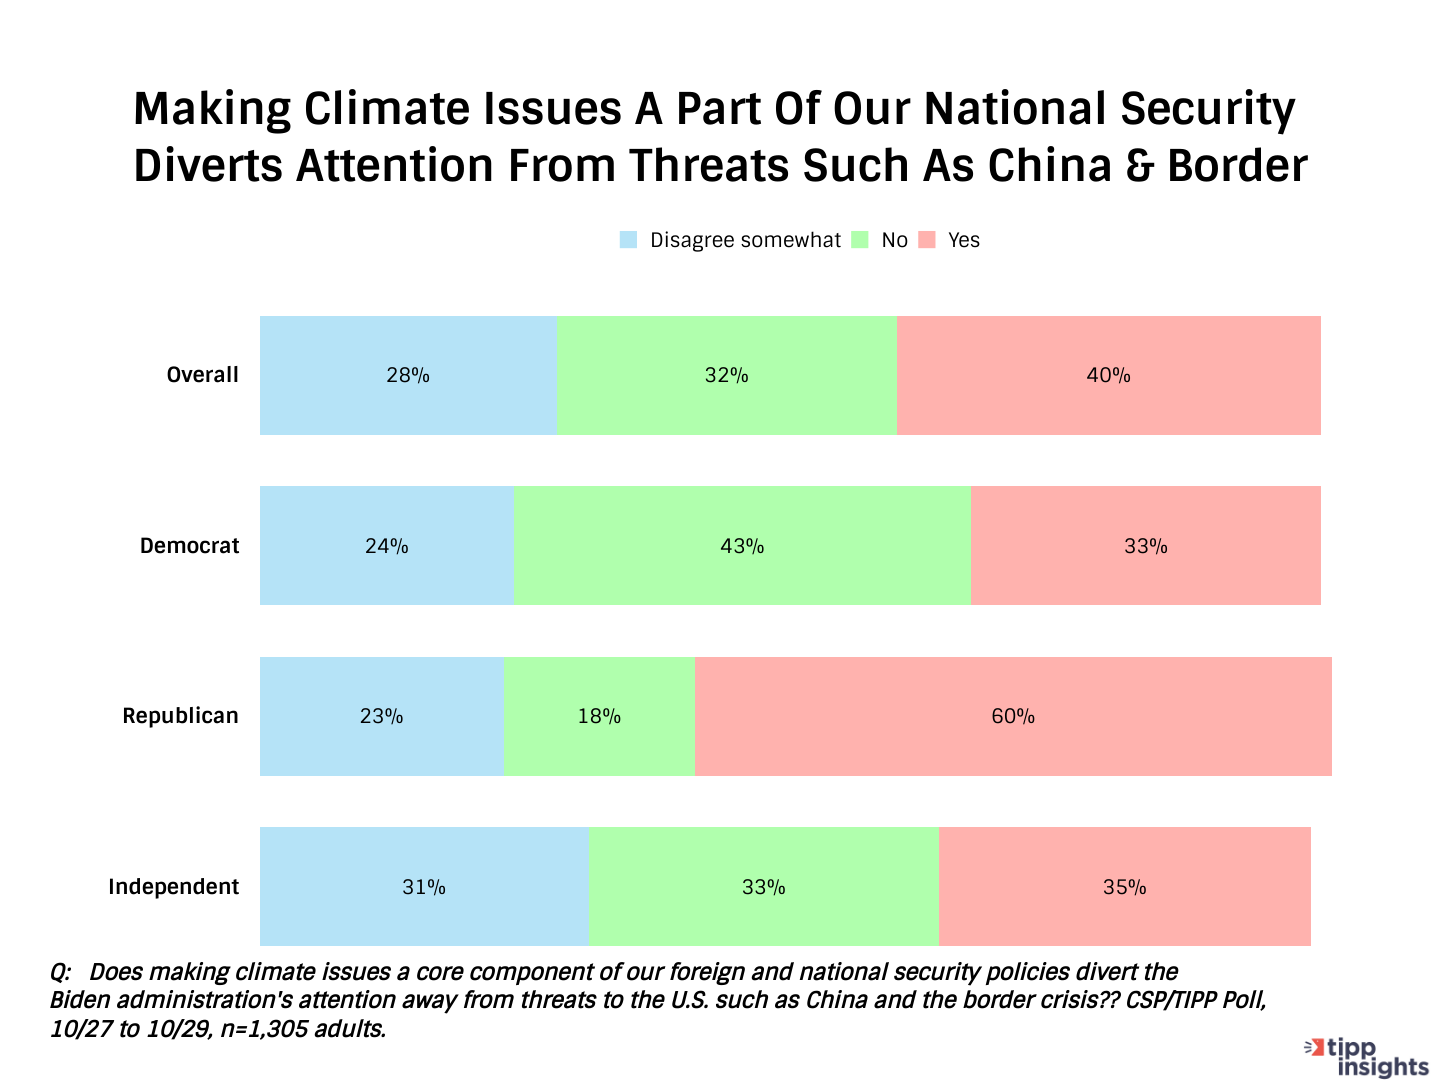 CSP/TIPP Poll Results: Does making climate issues a core component of our forein and national security divert from threats